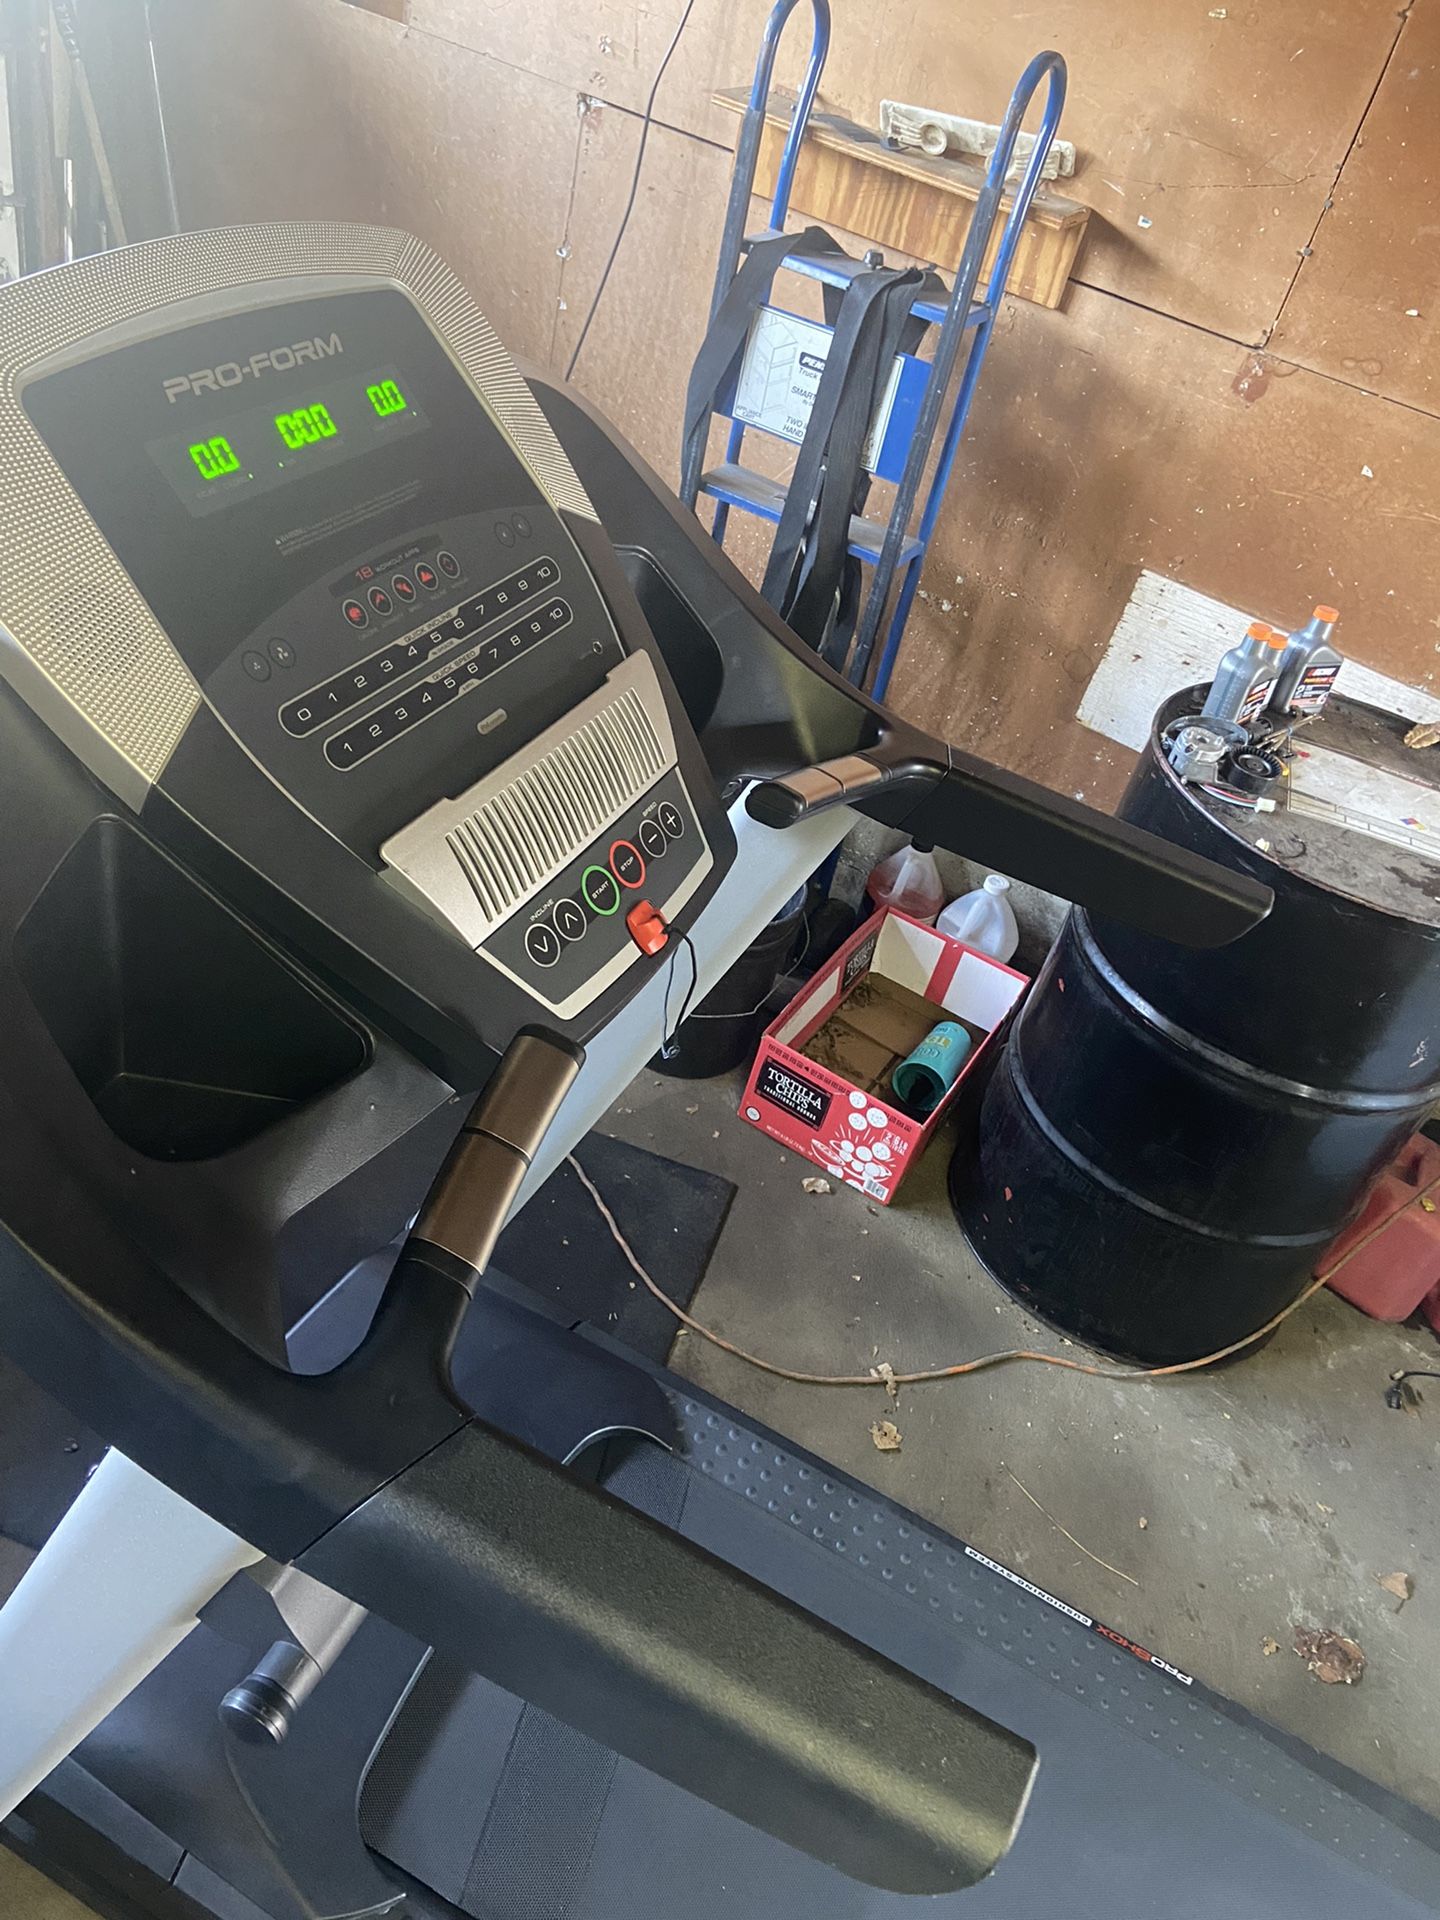 ProForm treadmill and NordicTrack Elliptical. (both Like New$